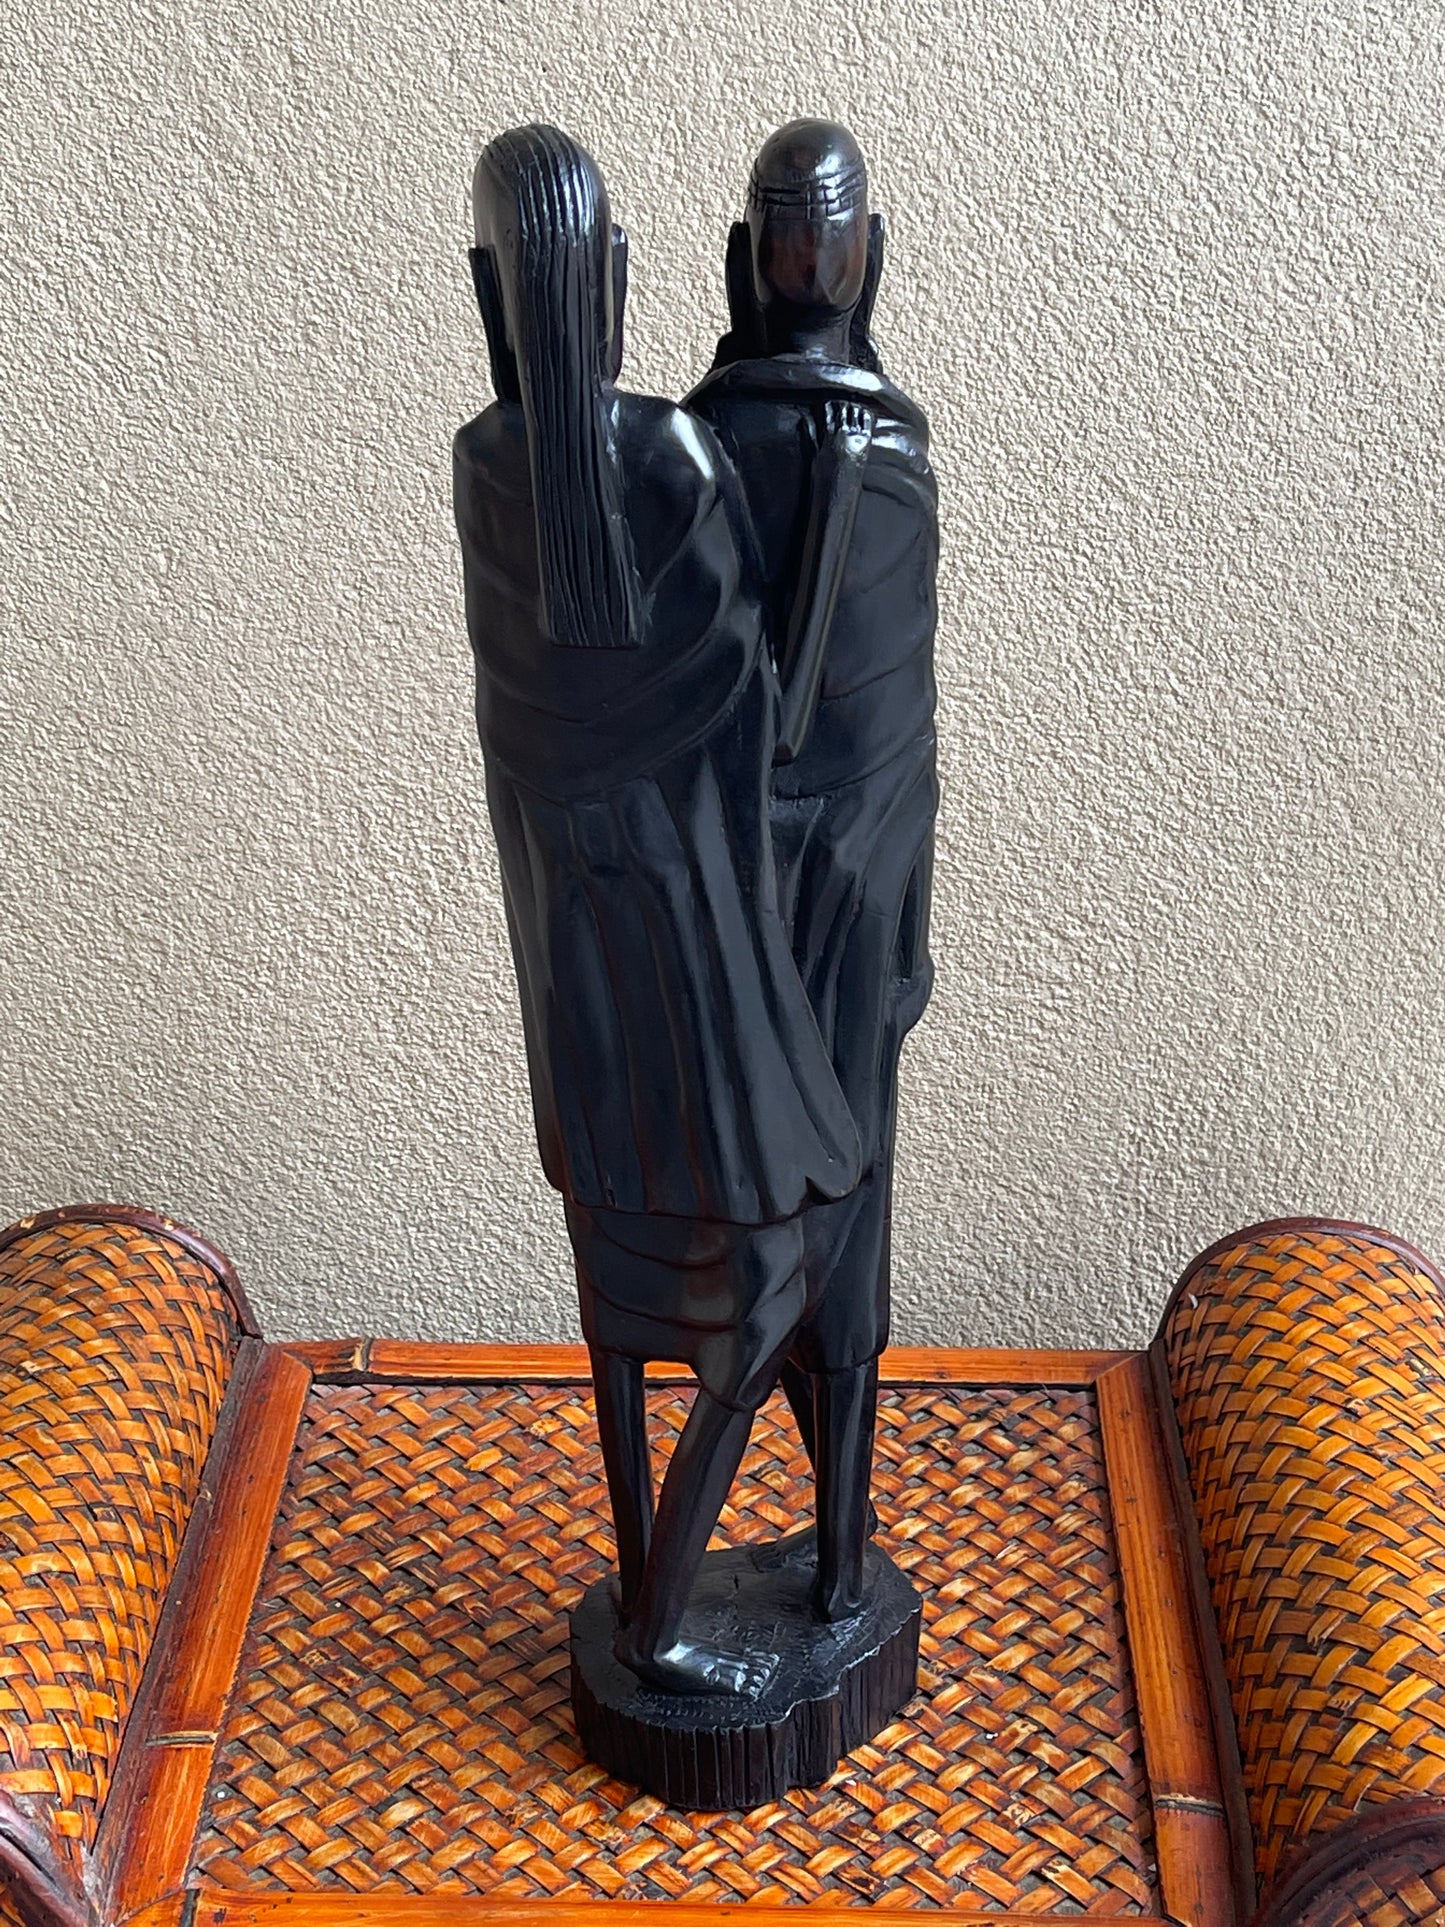 The Protector’s Statue - Medium Size in Ebony Wood